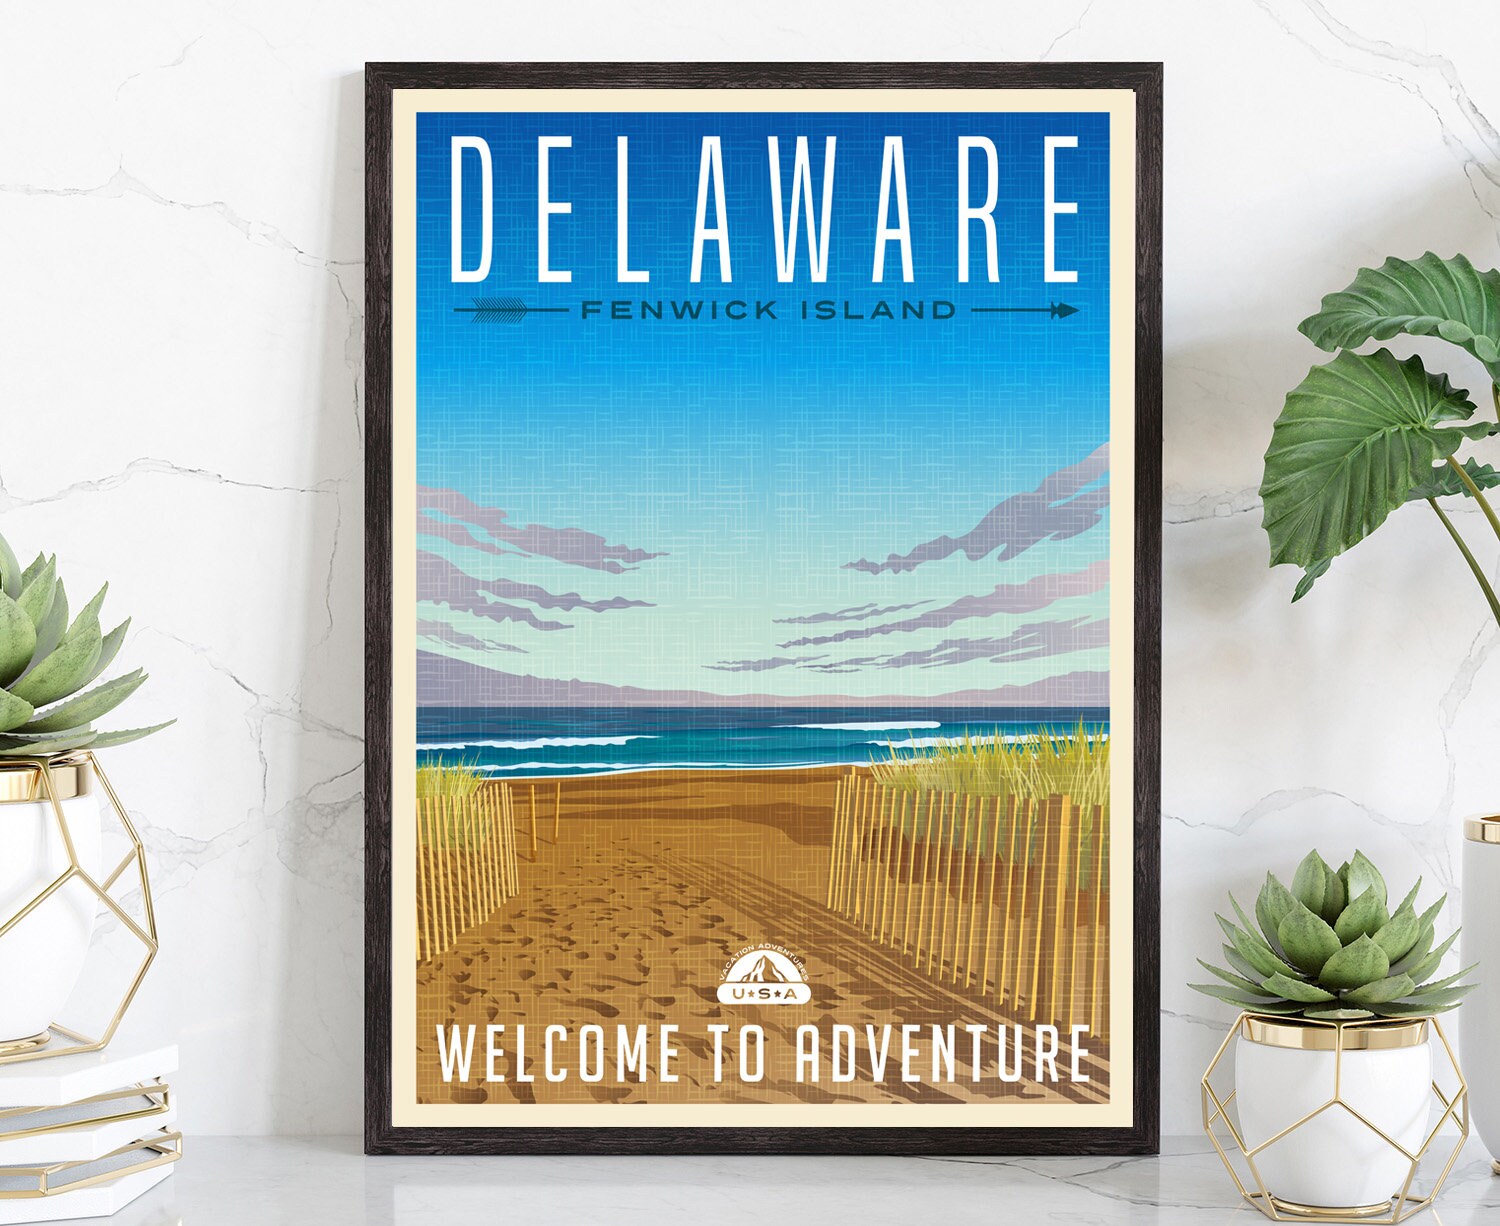 Retro Style Travel Poster, Delaware Vintage Rustic Poster Print, Home Wall Art, Office Wall Decor, Posters, Delaware, State Map Poster Print